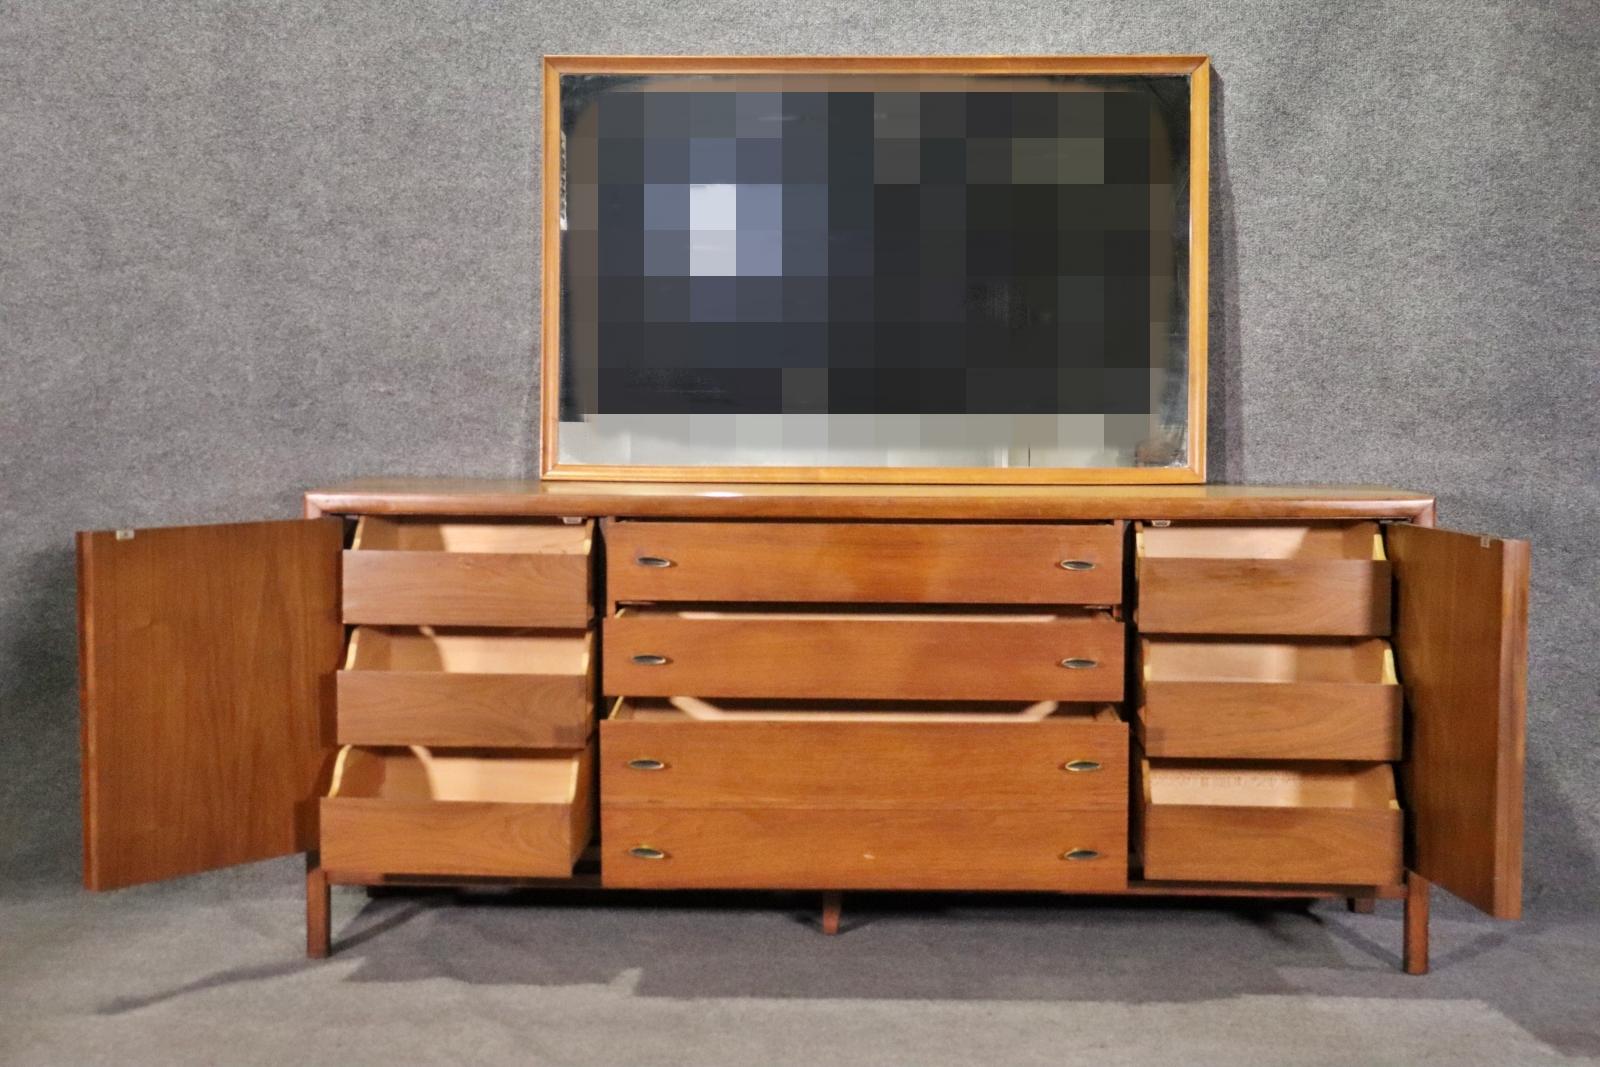 Long walnut dresser with total drawers, six hidden by doors with inlay grain. Includes a large wall mirror.
Mirror: 32h, 49w
Please confirm location NY or NJ